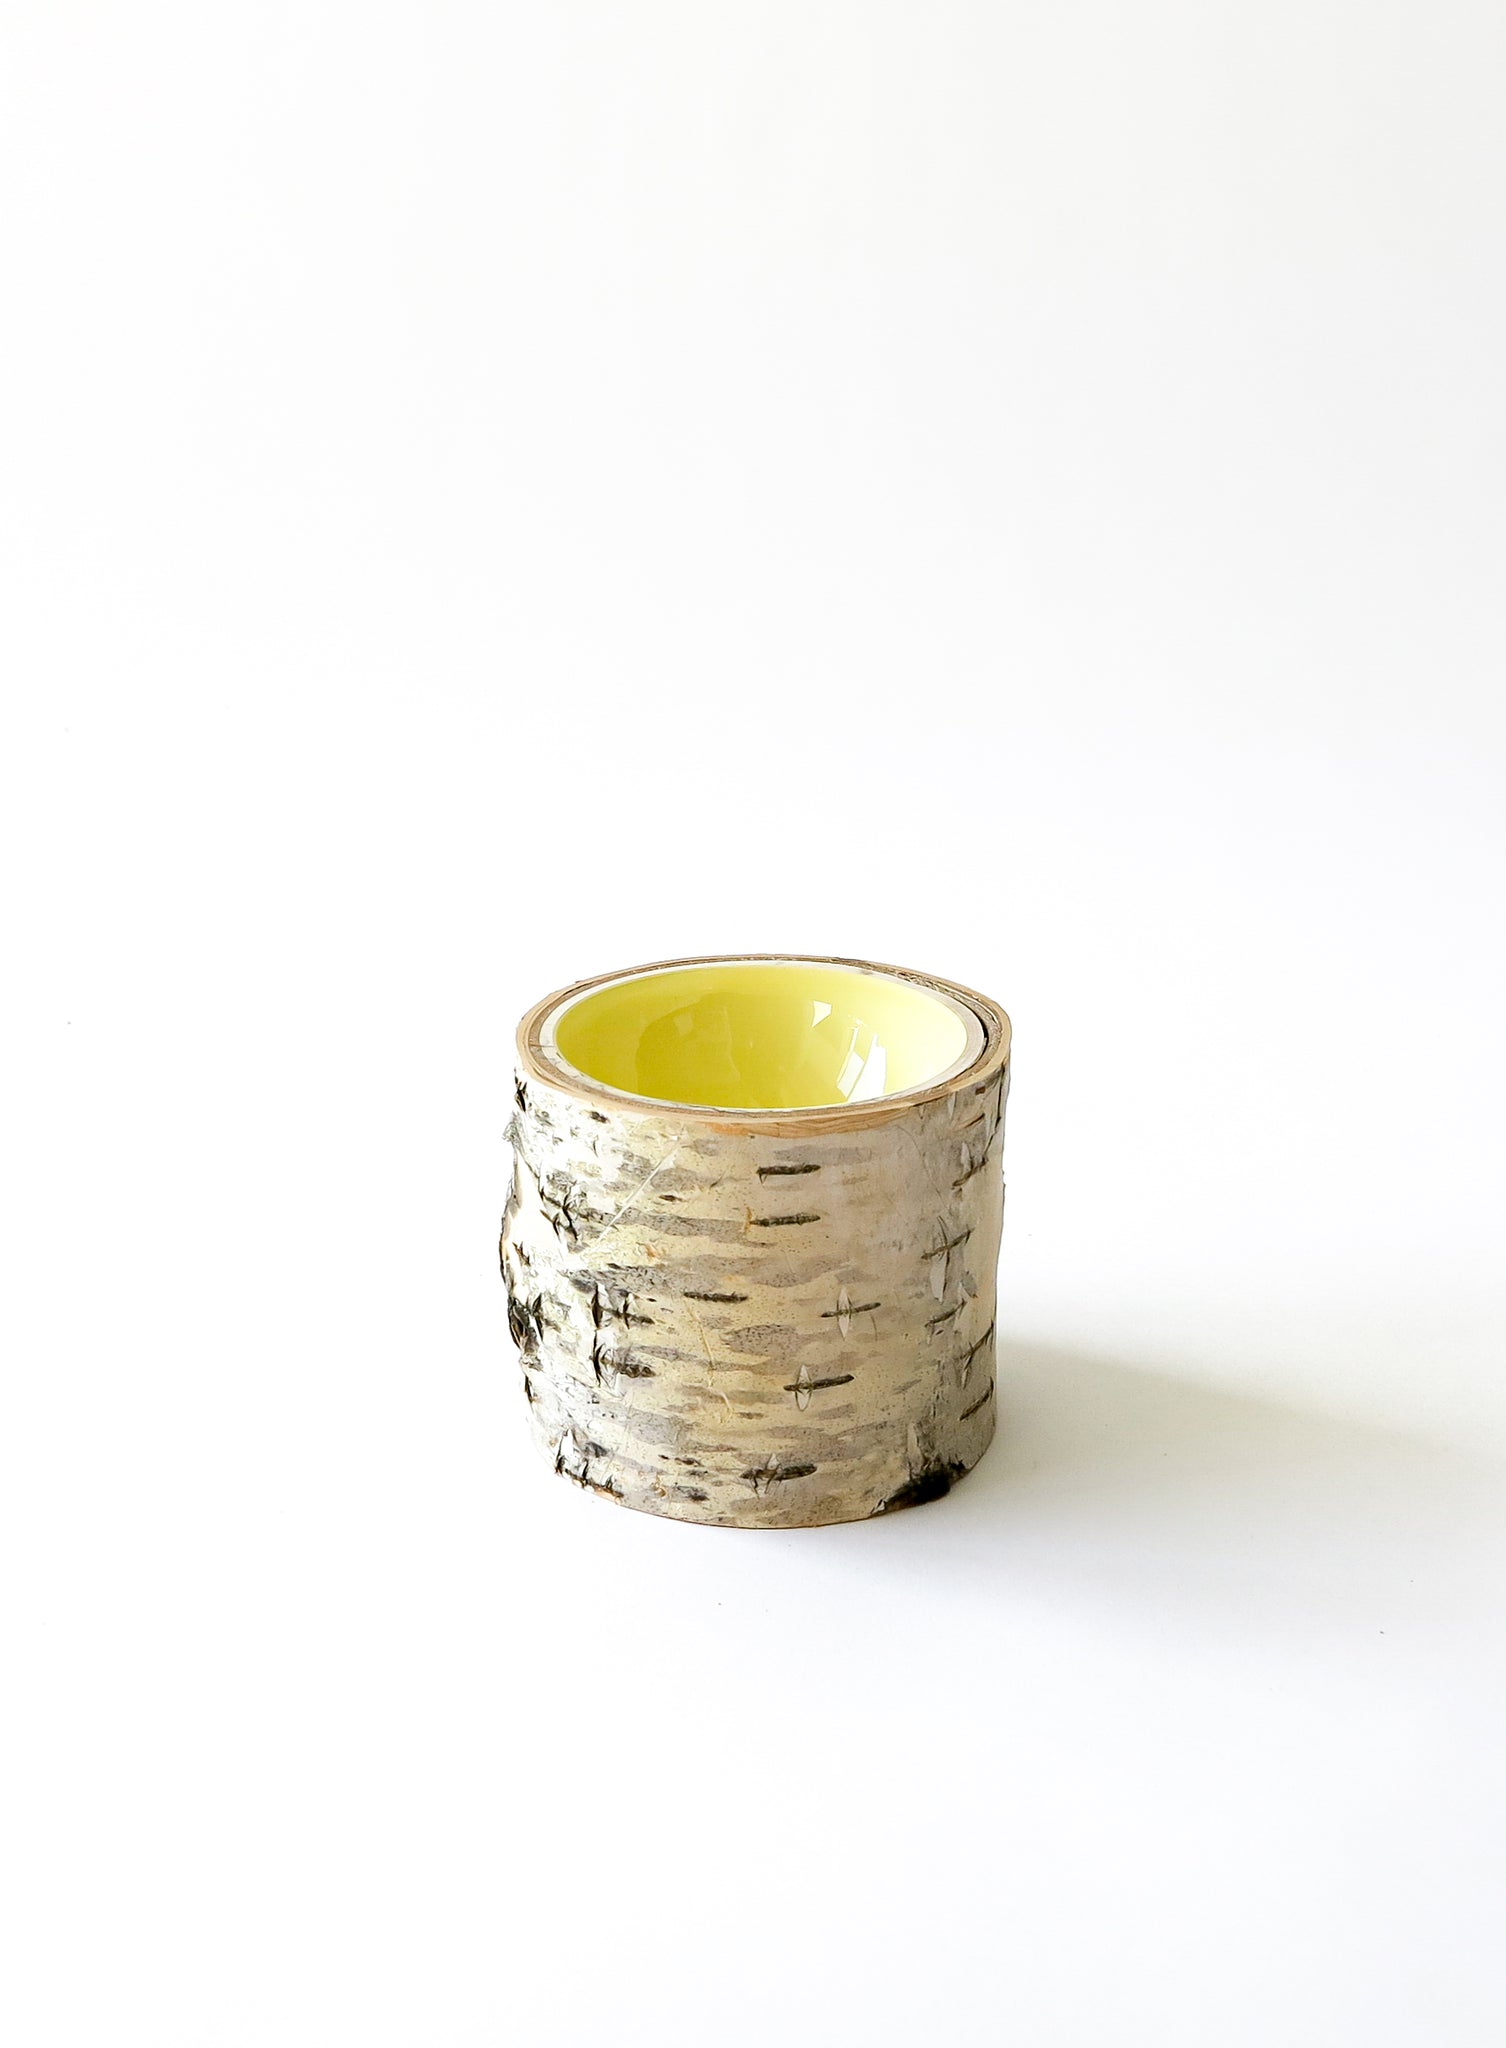 Size 3 Log Bowl - small wooden bowl with papery birch bark, glossy interior is a butter yellow colour.